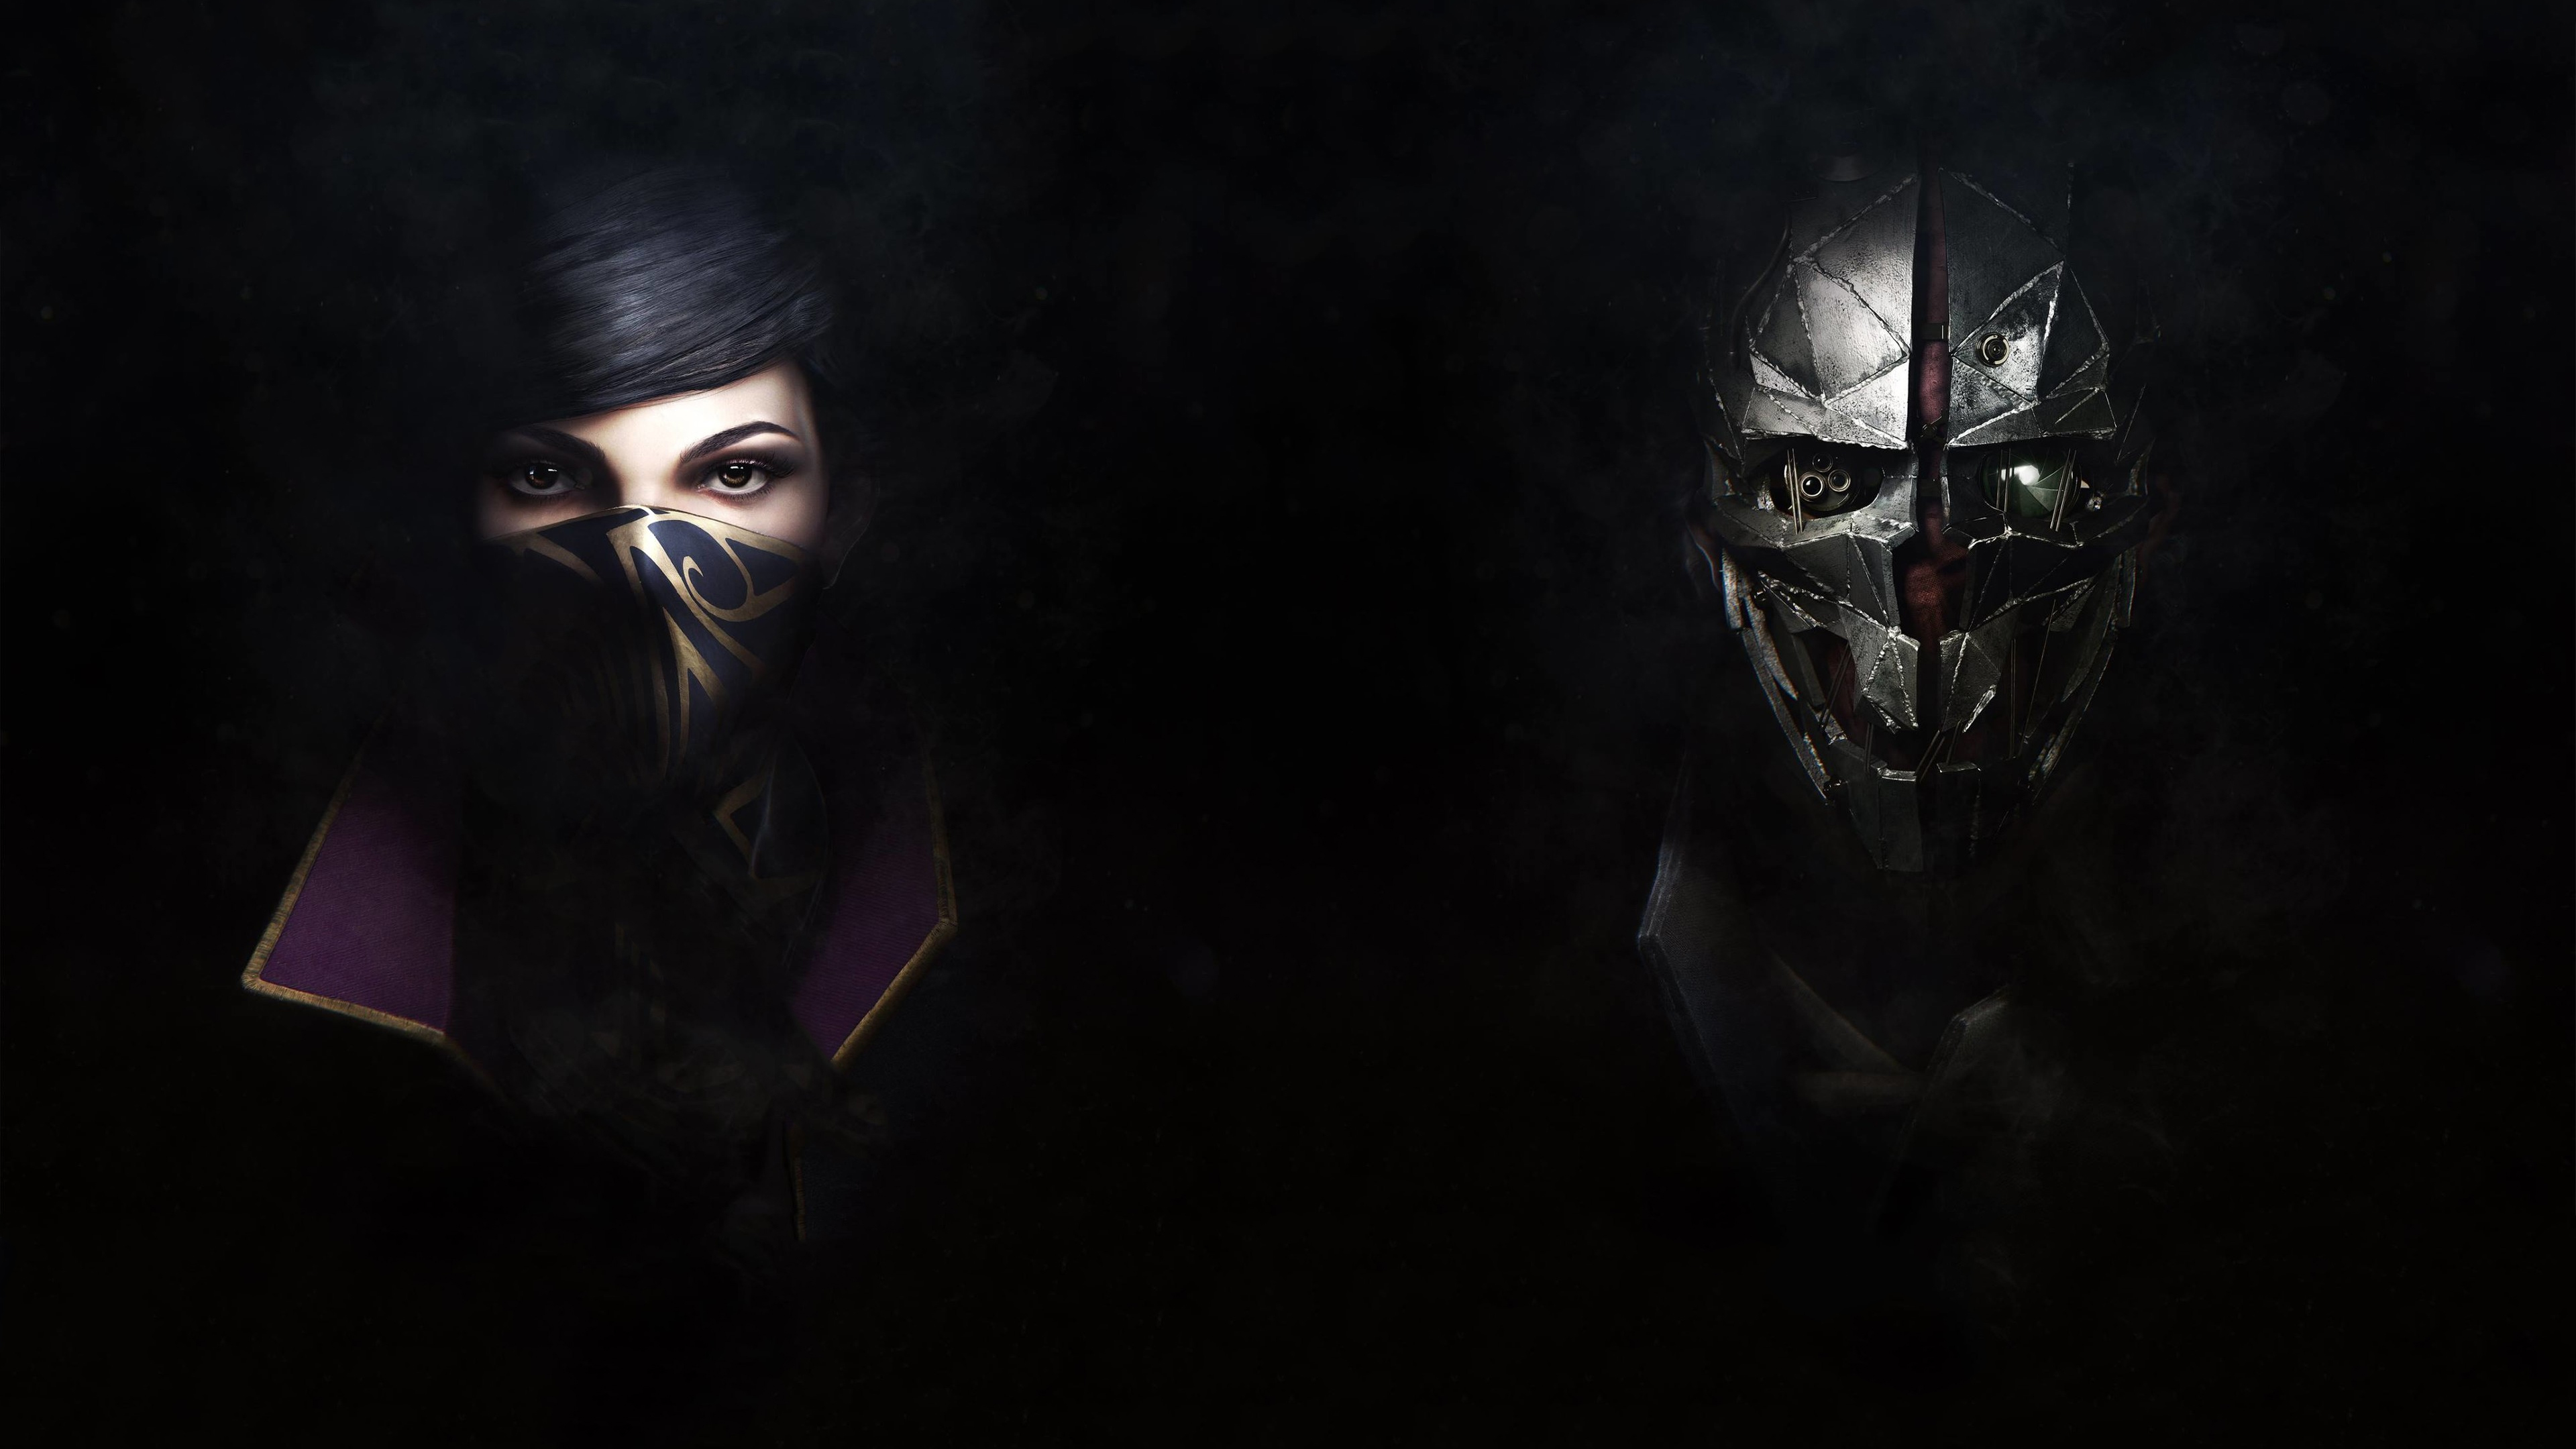 dishonored 2, Video games, Mask, Dishonored Wallpaper